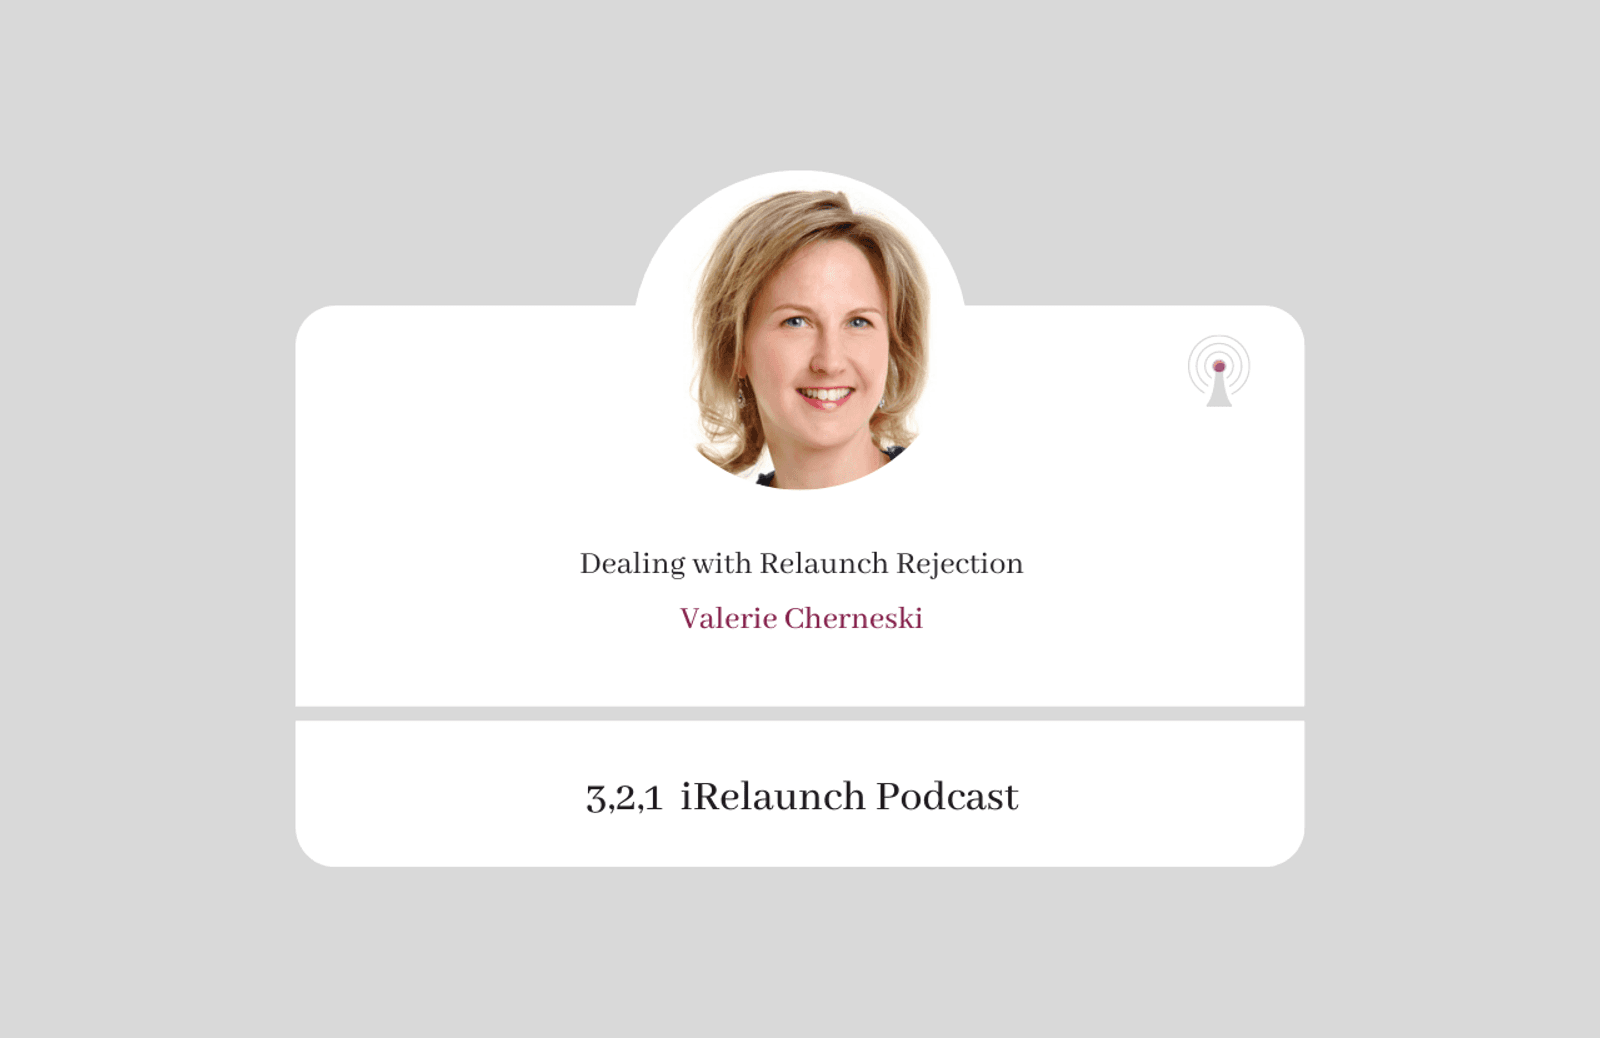 3, 2, 1 iRelaunch Podcast Thumbnail for Episode #3 with Valerie Cherneski's headshot. The episode's title is: "Dealing with Relaunch Rejection."